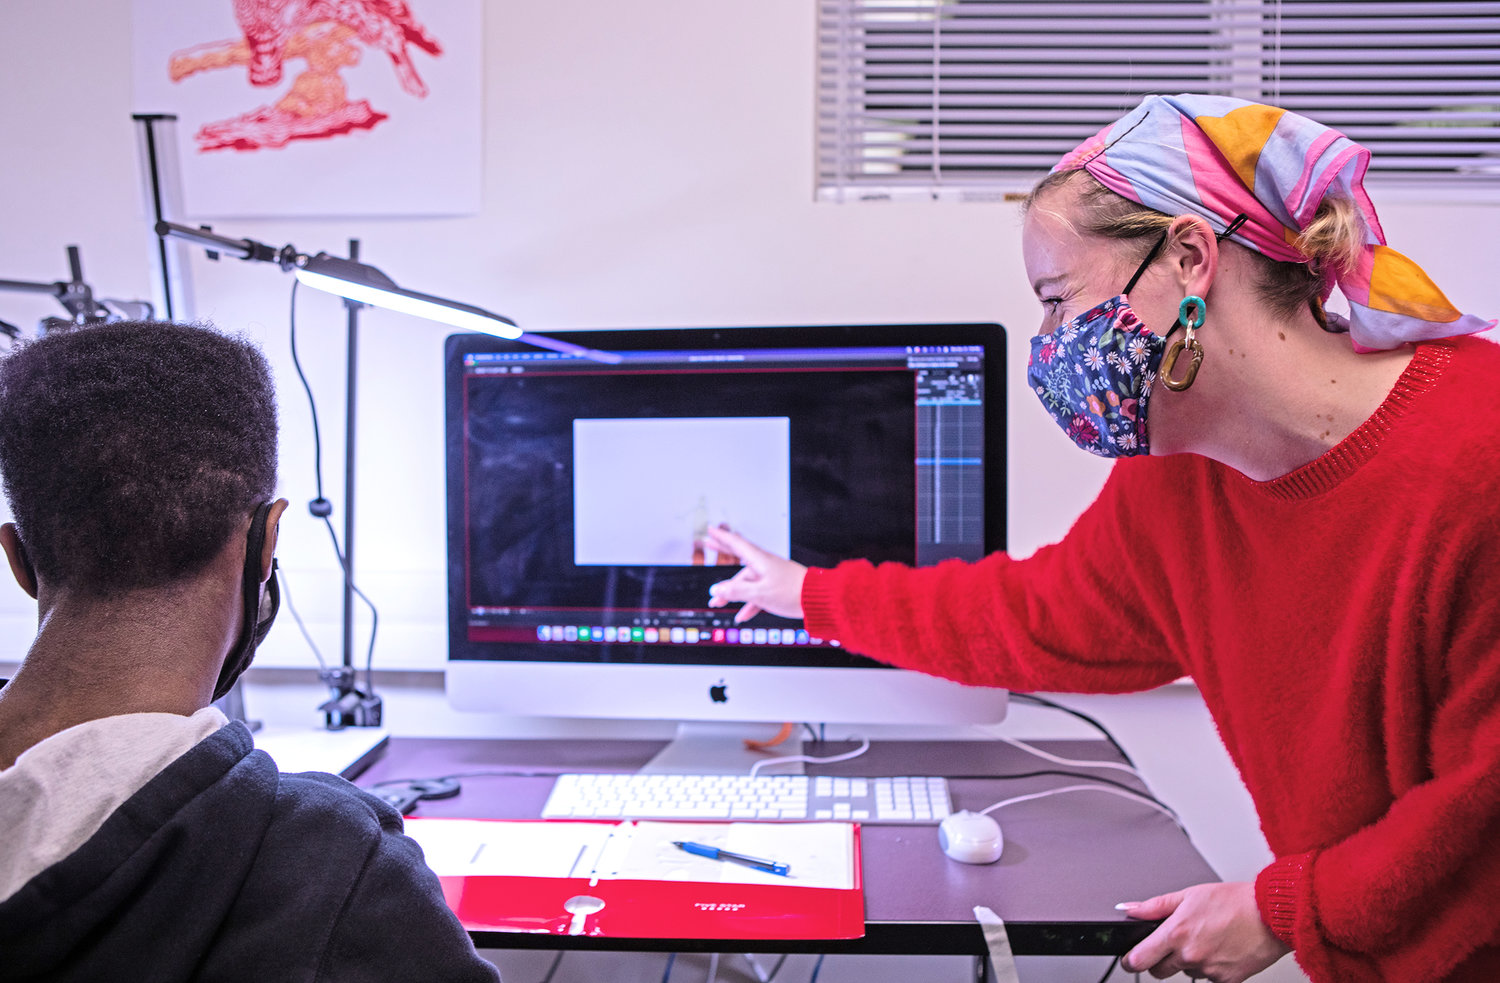 Former Munson-Williams Proctor Arts Institute Artist in Residence Amy Bruning instructs a course on Digital Animation, one of the courses offered through the arts institute’s Community Arts Education program this fall.